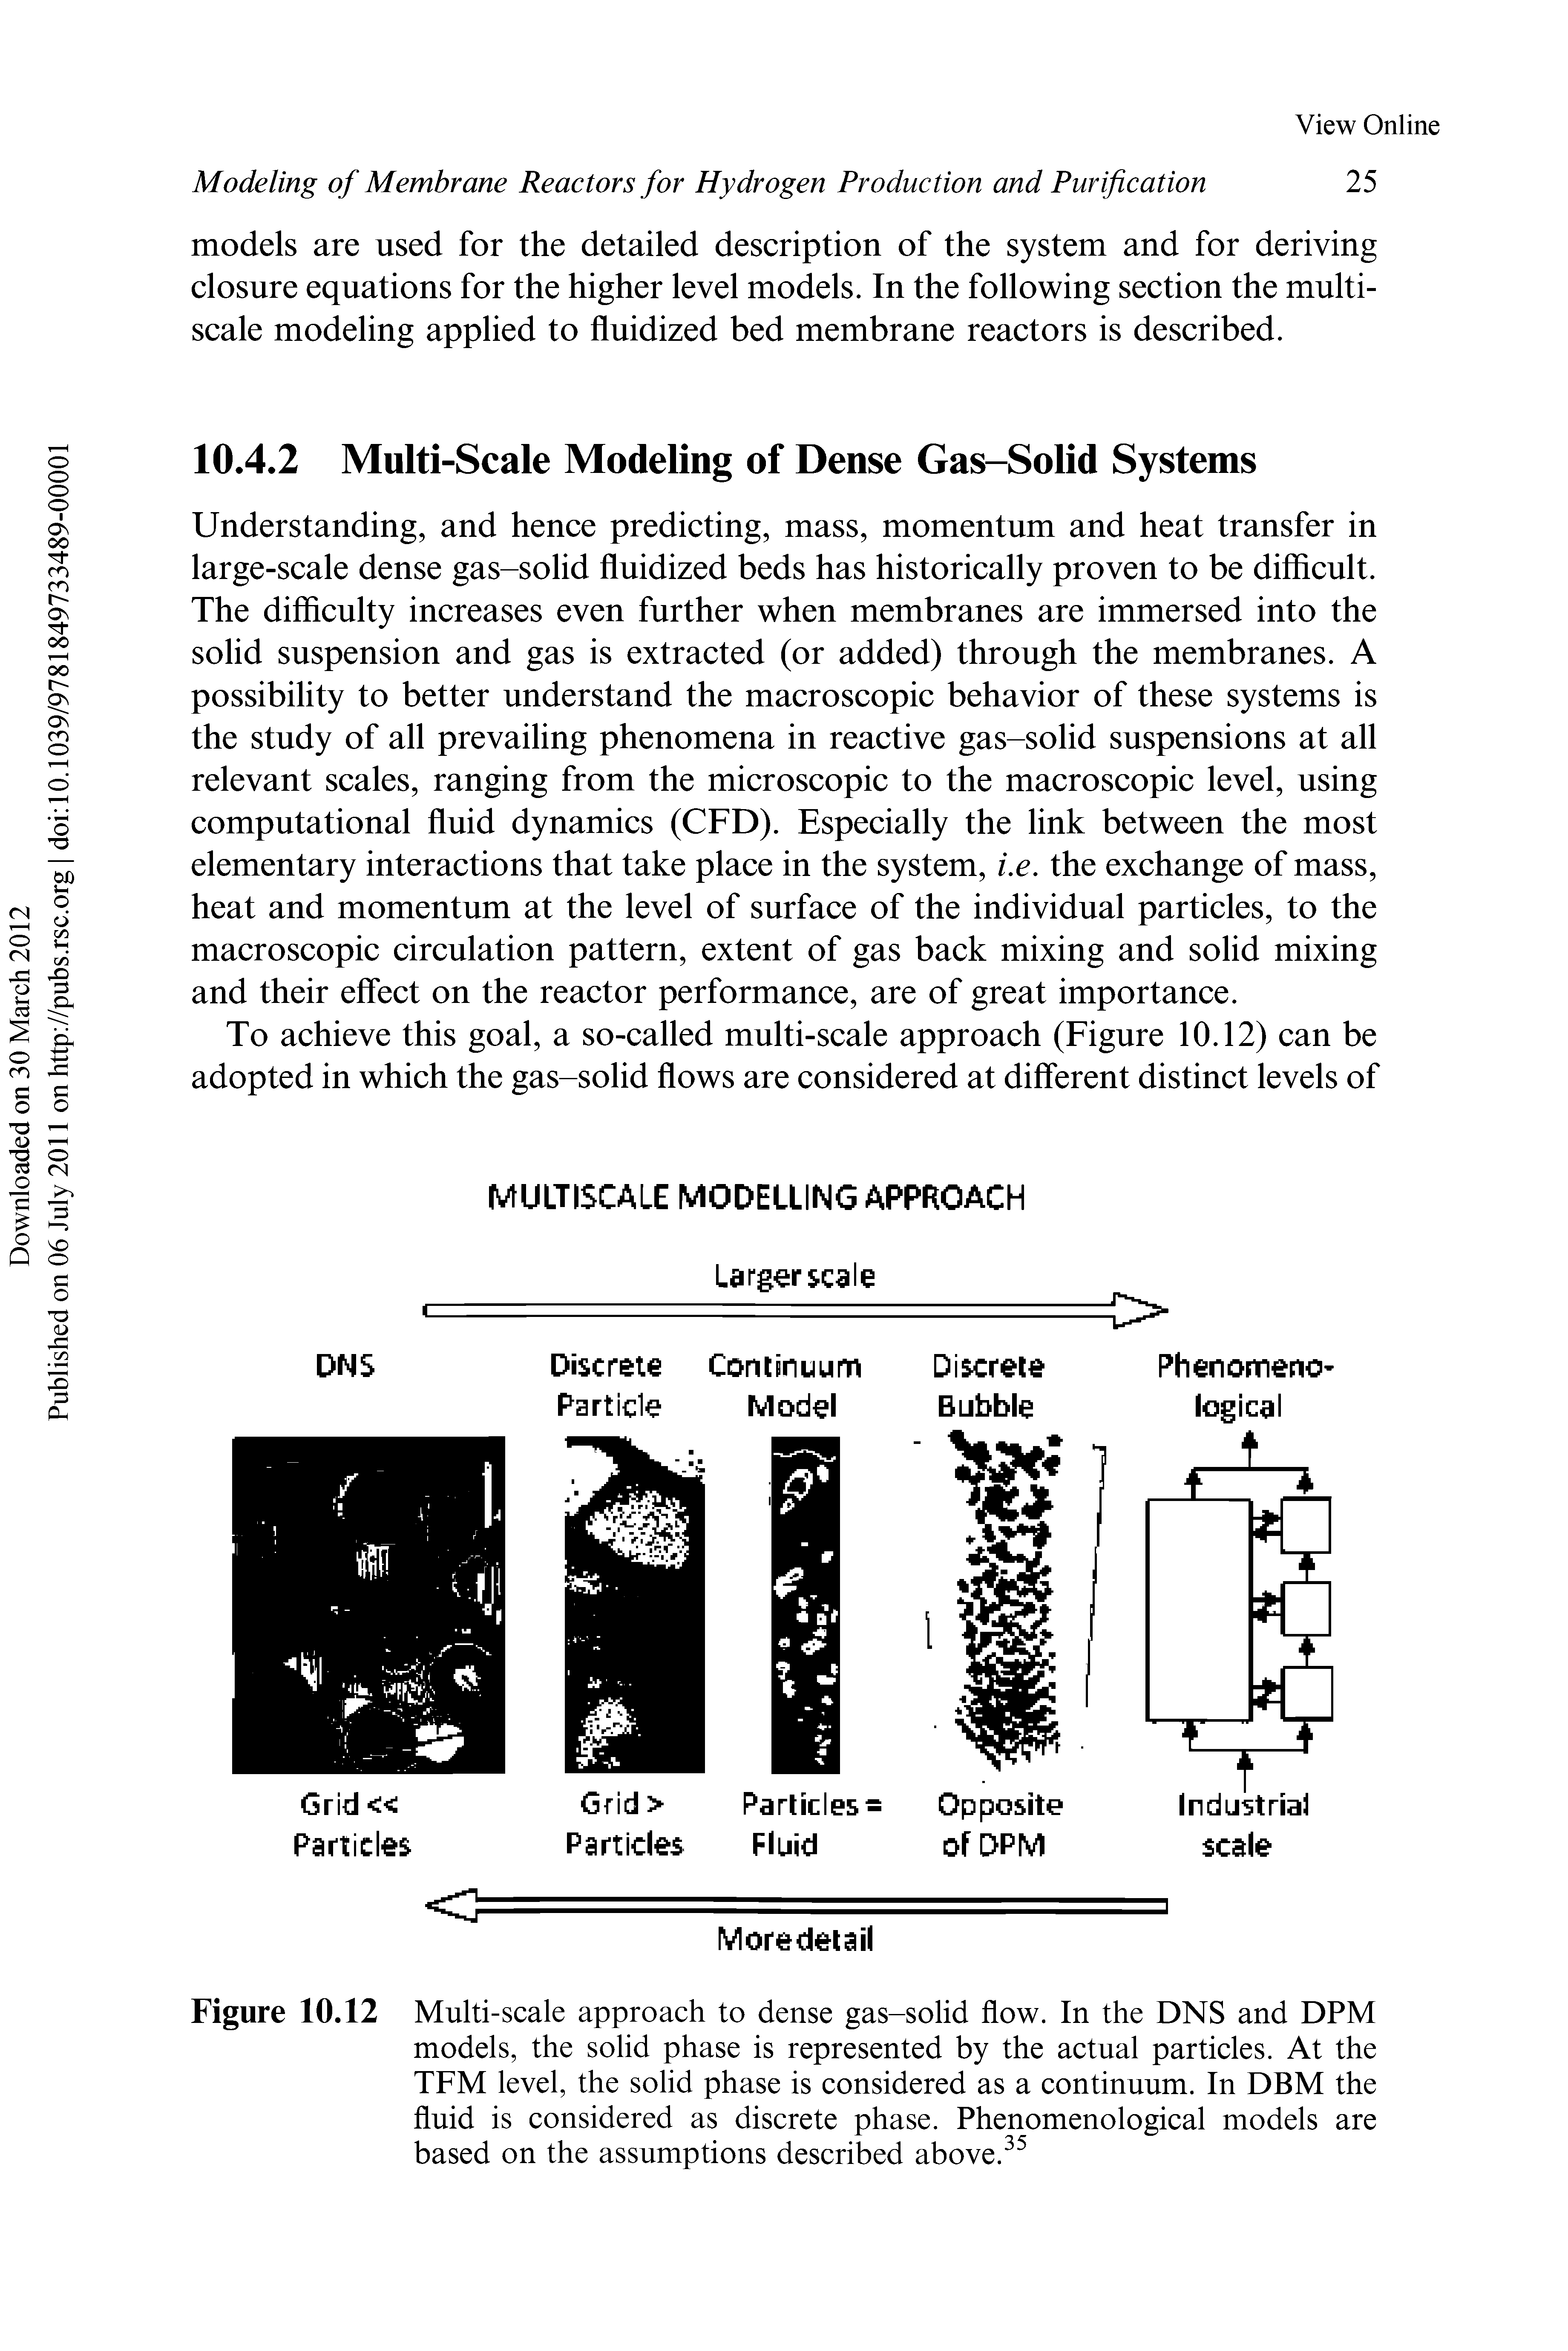 Figure 10.12 Multi-scale approach to dense gas-solid flow. In the DNS and DPM models, the solid phase is represented by the actual particles. At the TFM level, the solid phase is considered as a continuum. In DBM the fluid is considered as discrete phase. Phenomenological models are based on the assumptions described above.